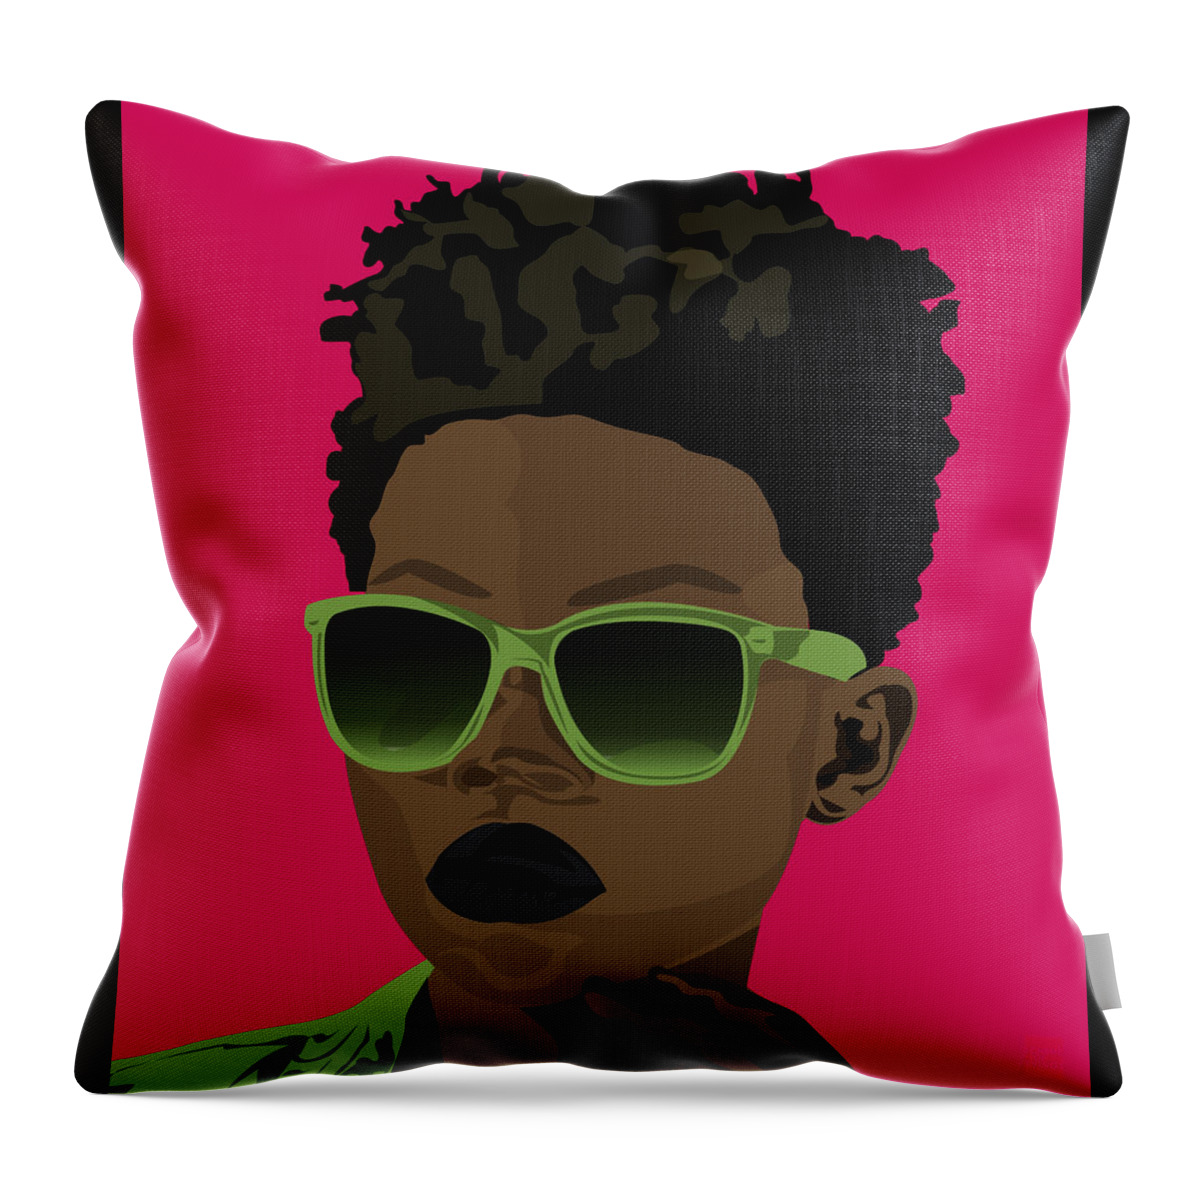 Green Throw Pillow featuring the digital art Too Hot by Scheme Of Things Graphics